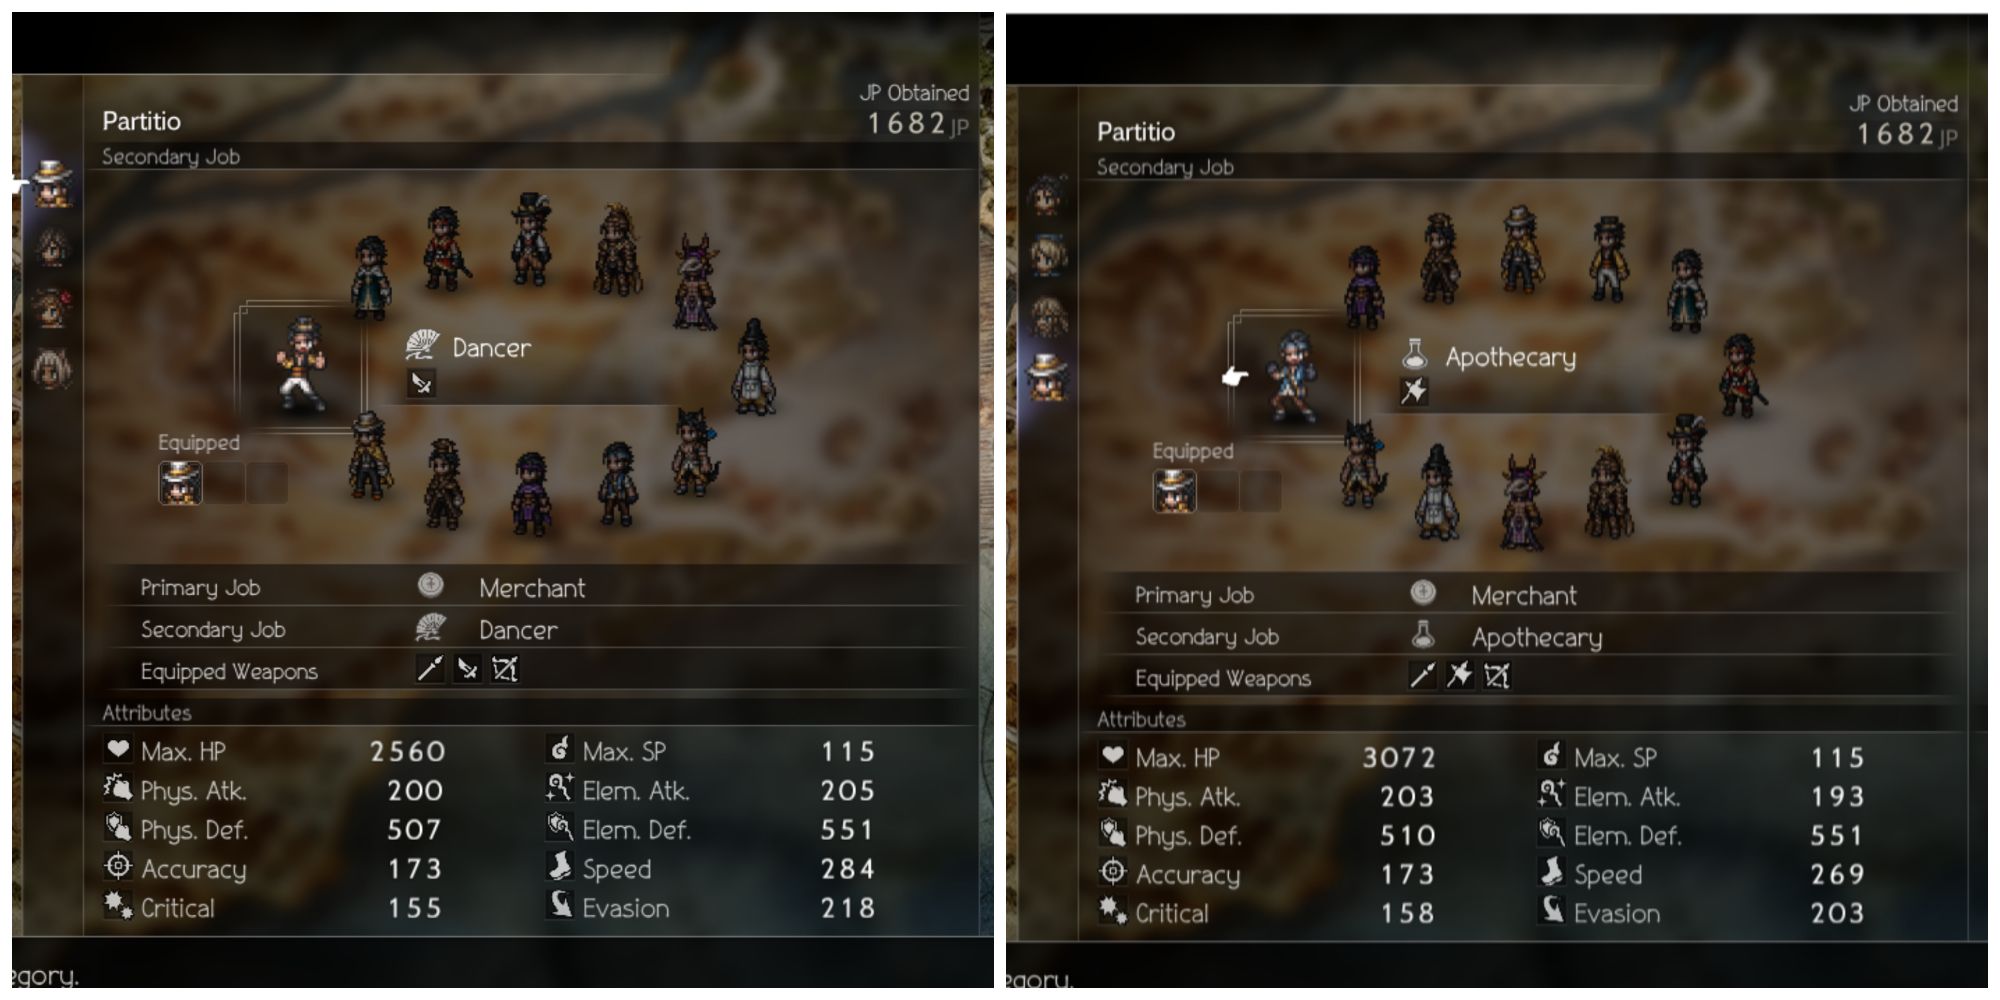 Partitio'S Side Job Choices In Octopath Traveler 2, Dancer, And Apothecary